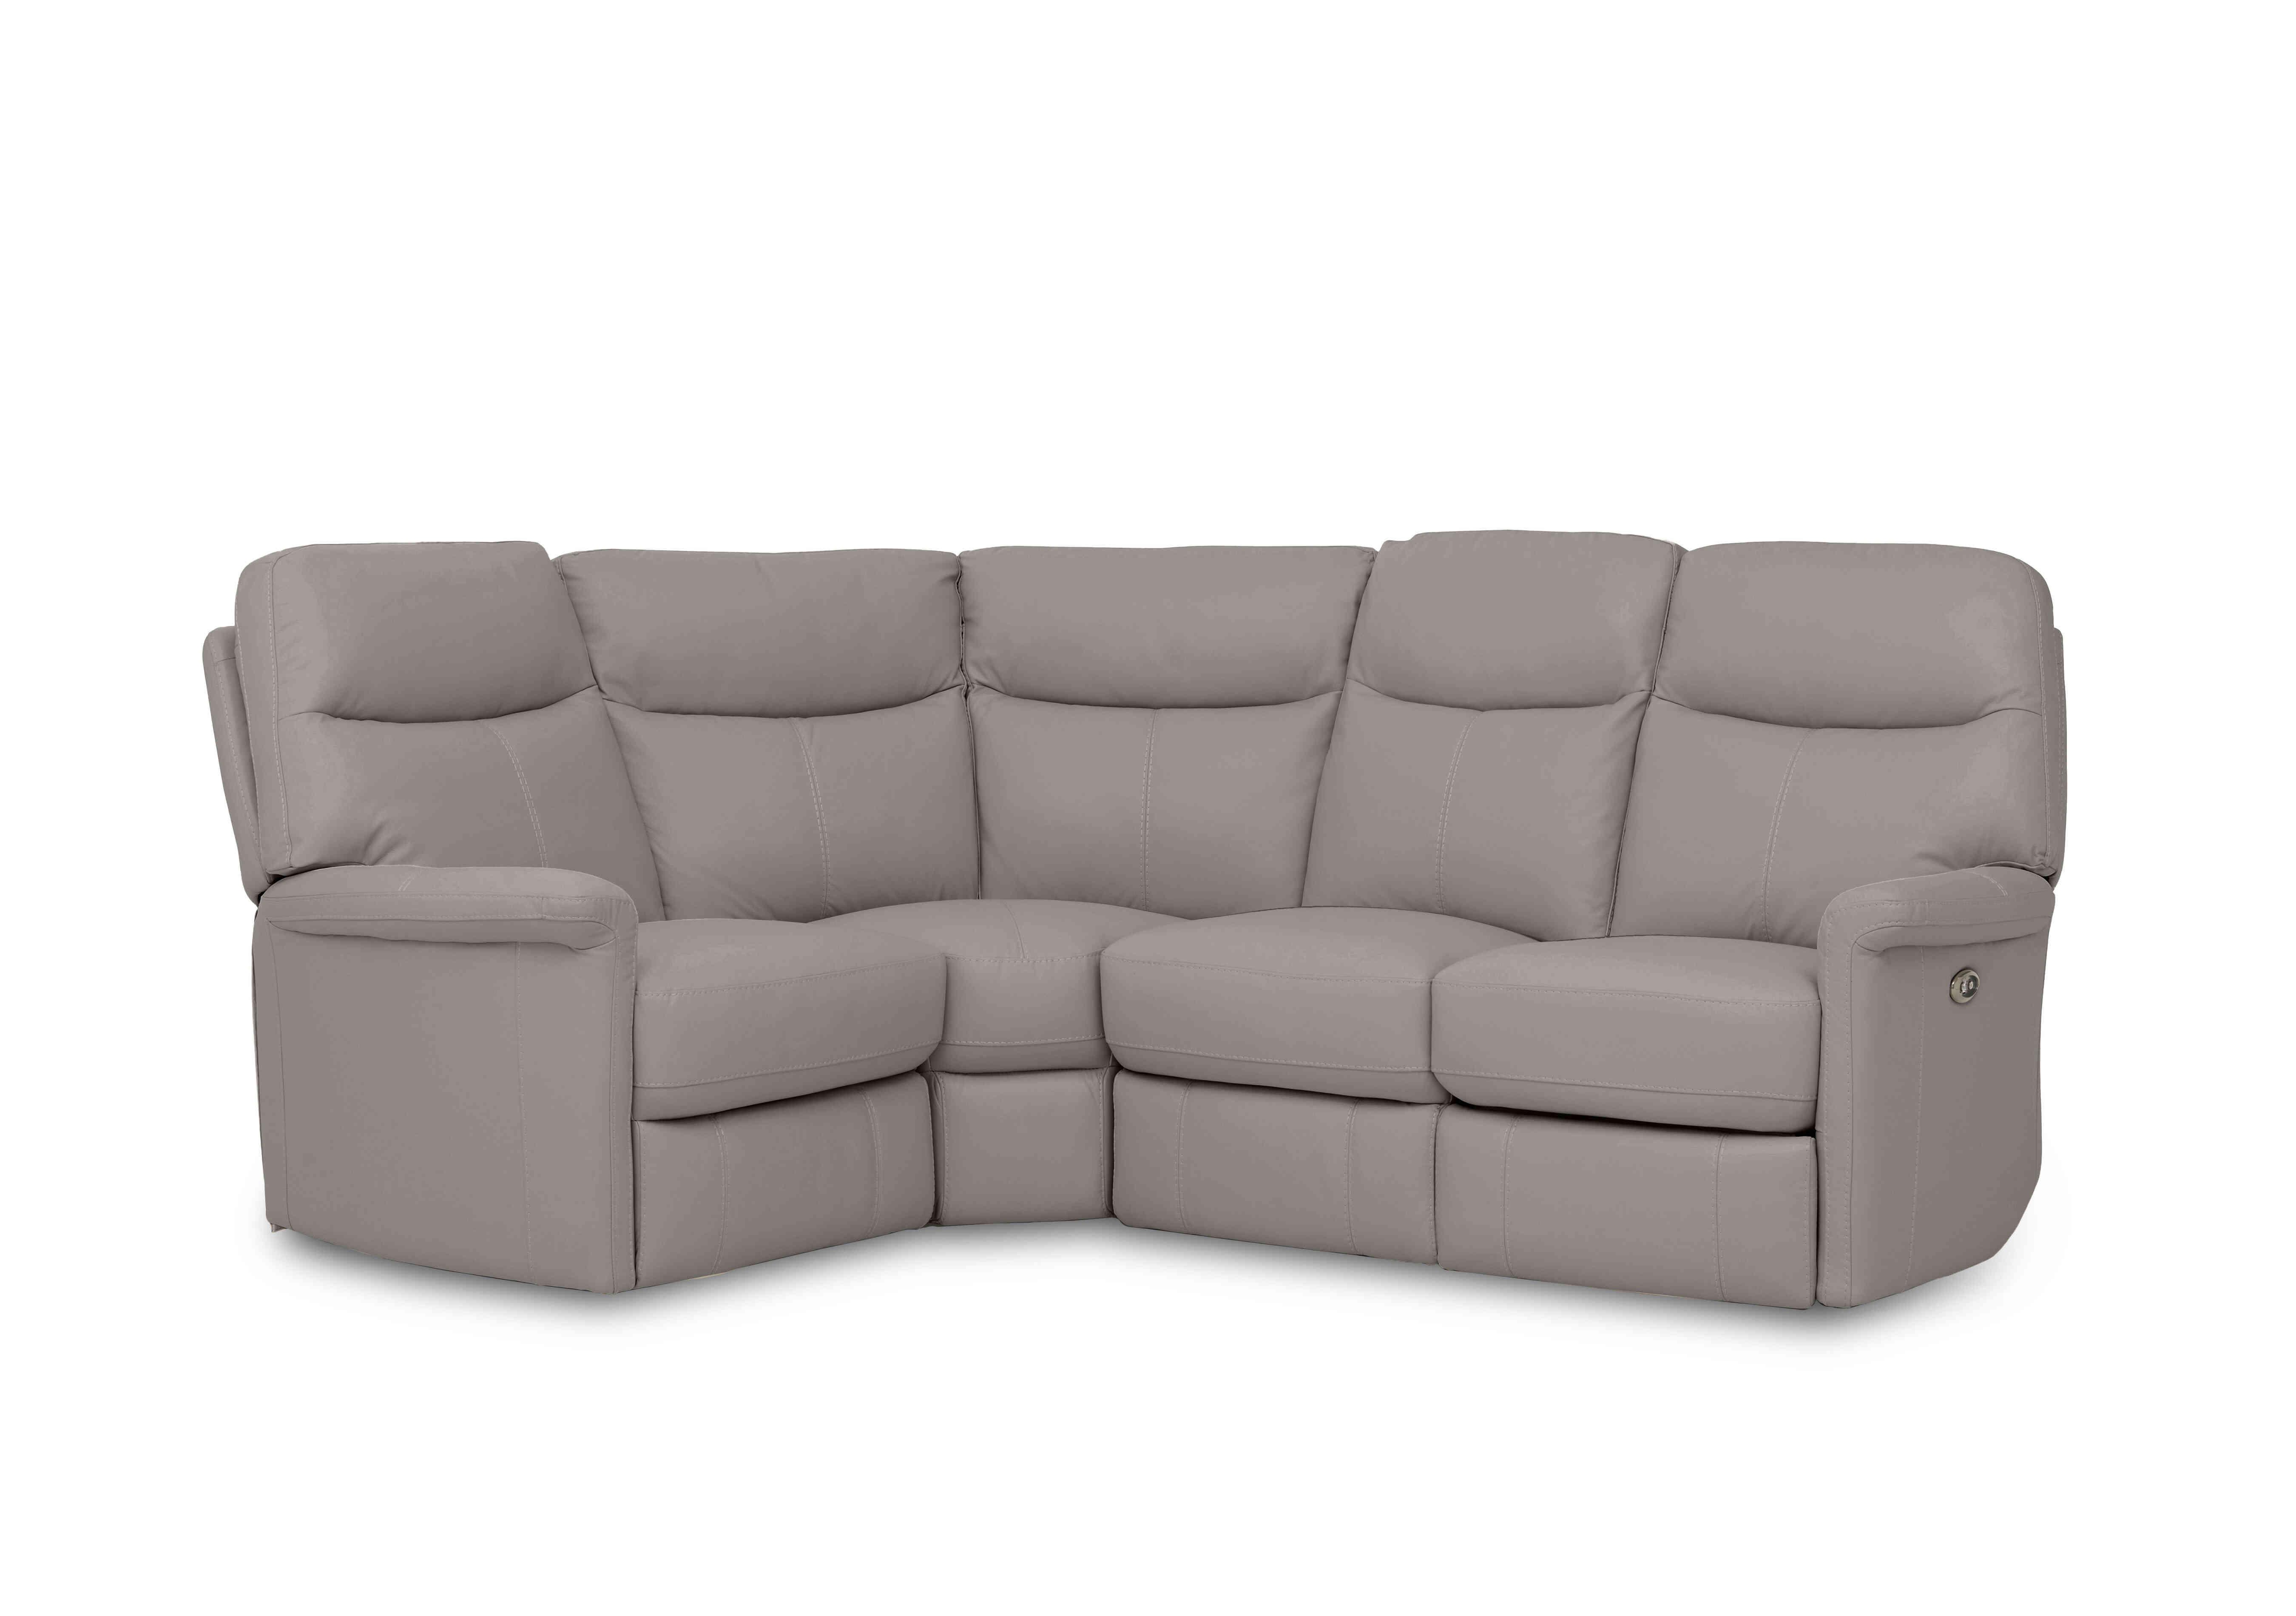 Compact Collection Lille Leather Corner Sofa in Bv-946b Silver Grey on Furniture Village